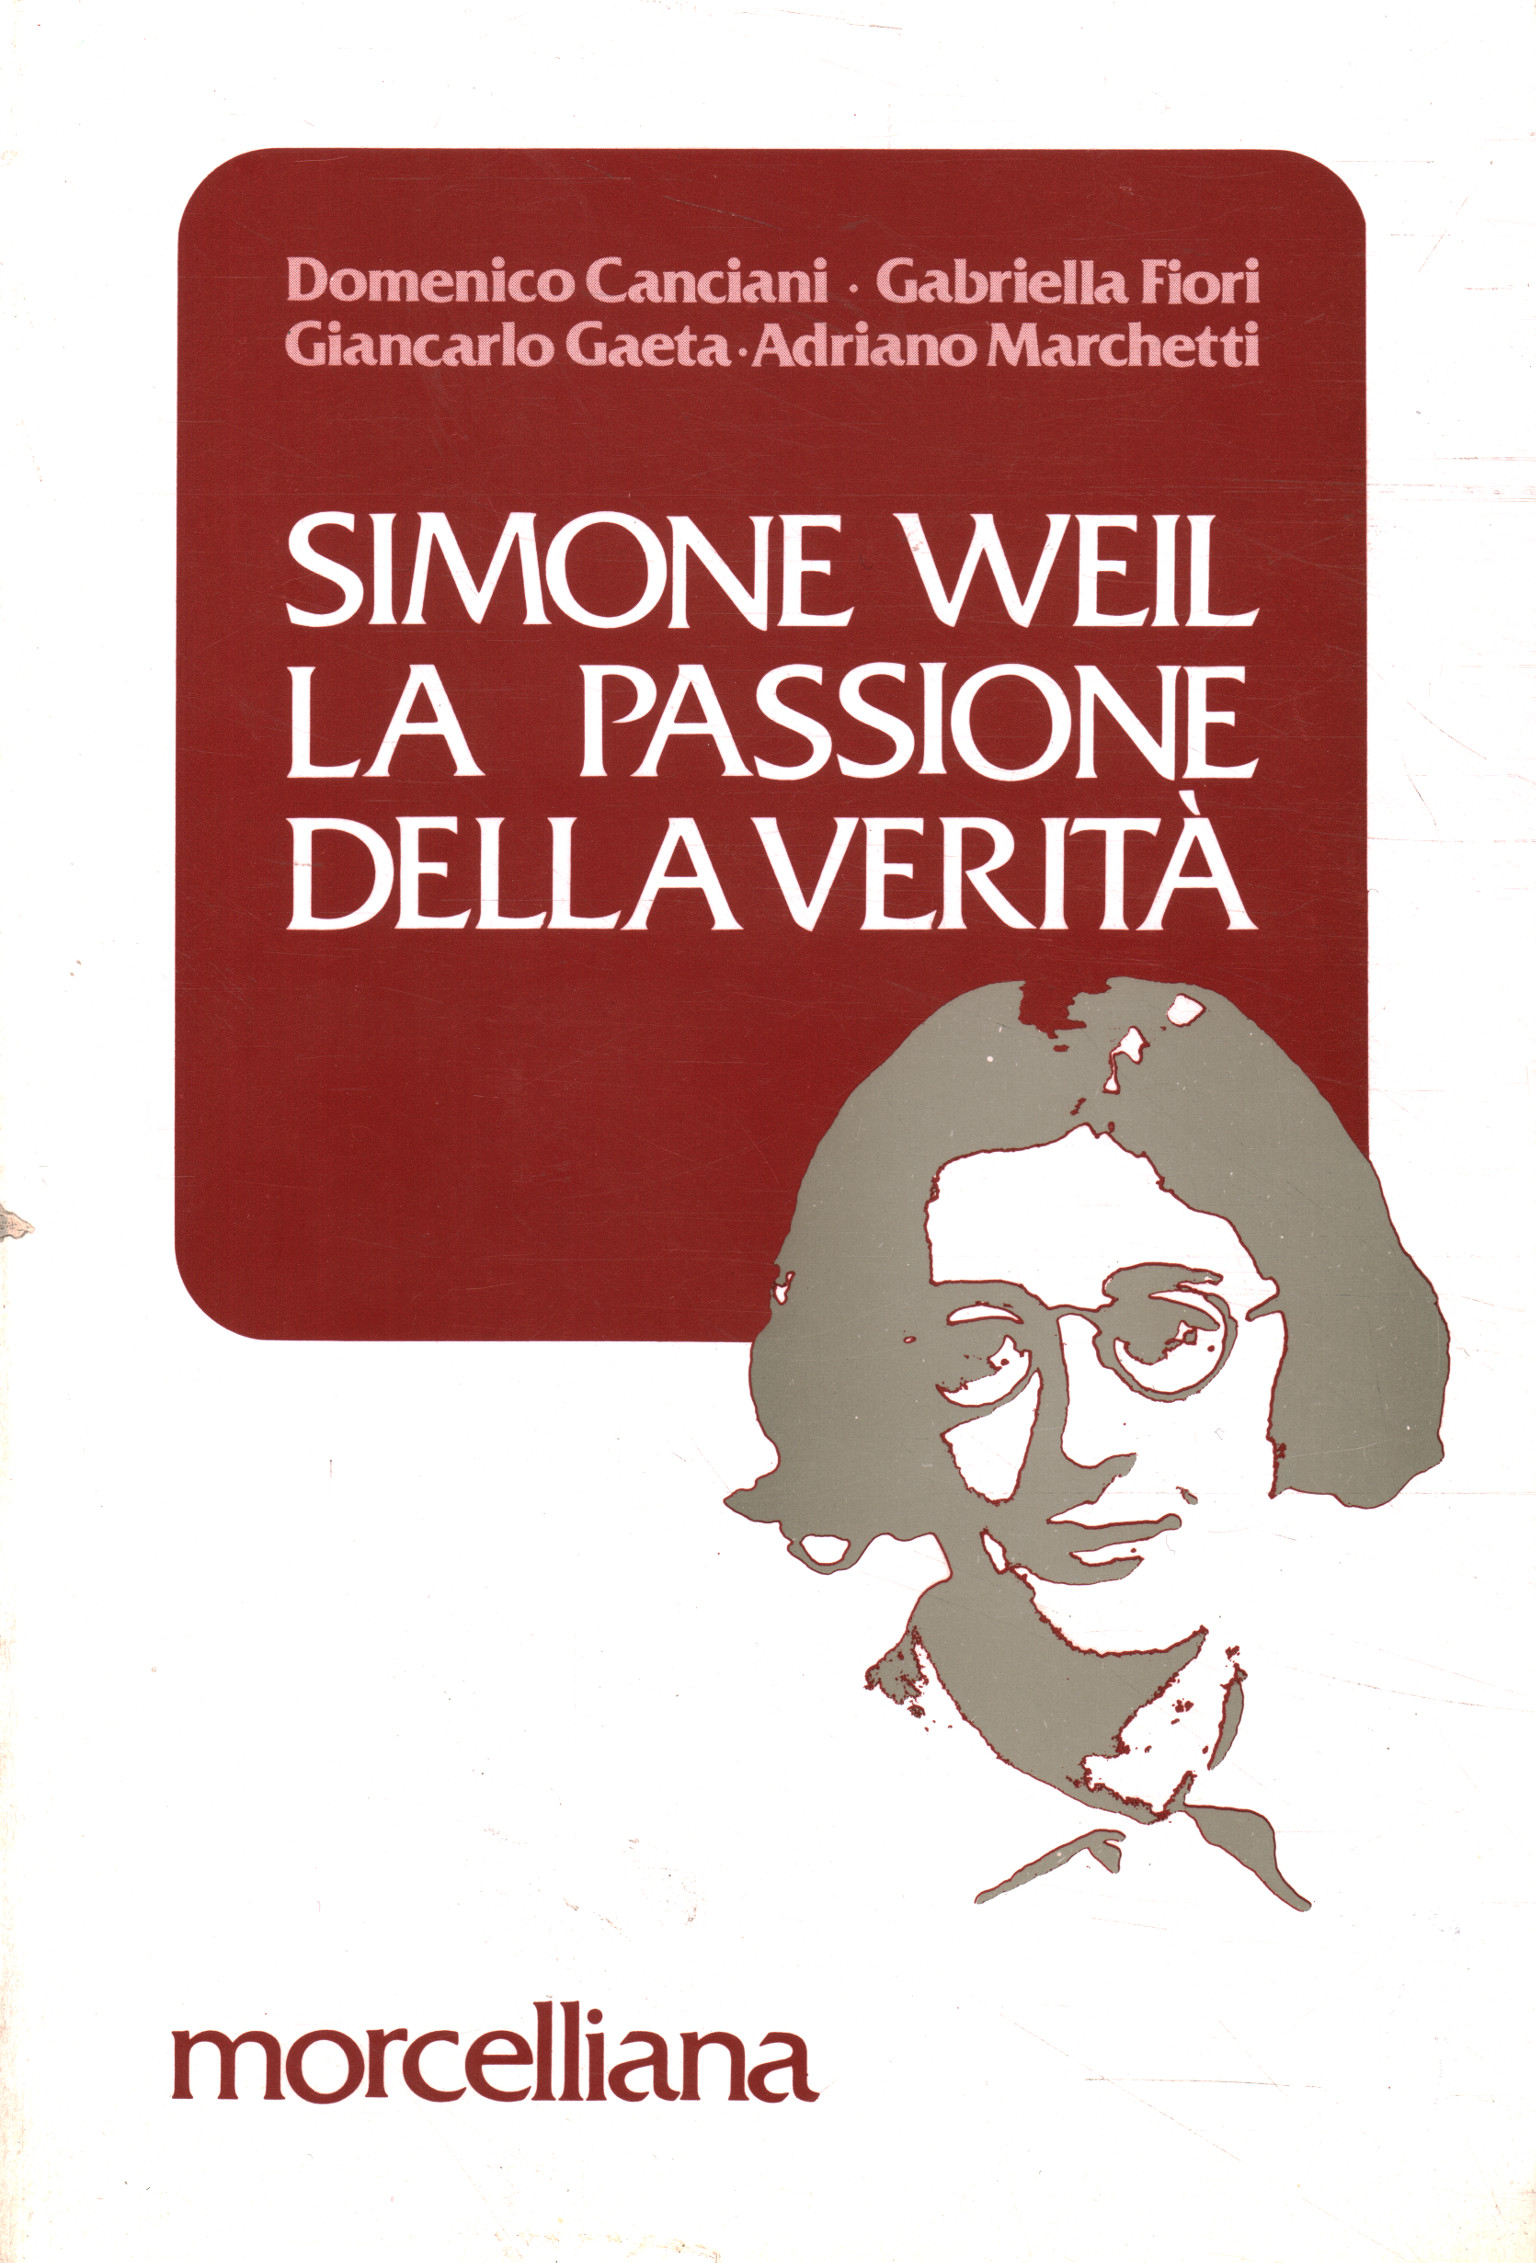 Simone Weil. The passion of truth